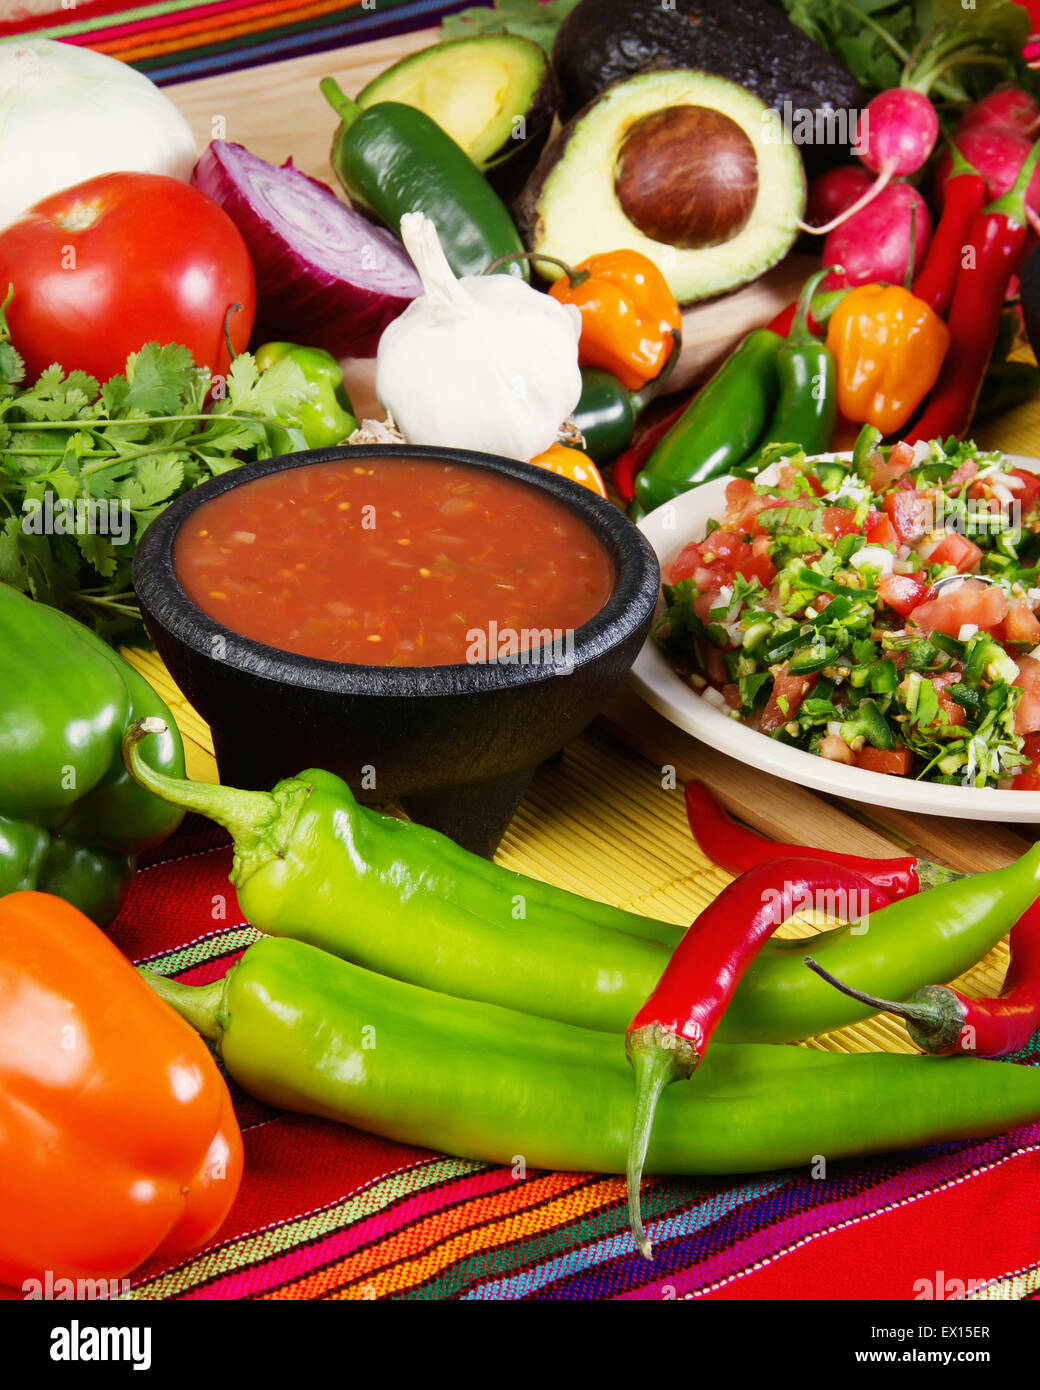 Stock image of traditional mexican food salsas and ingredients Stock Photo